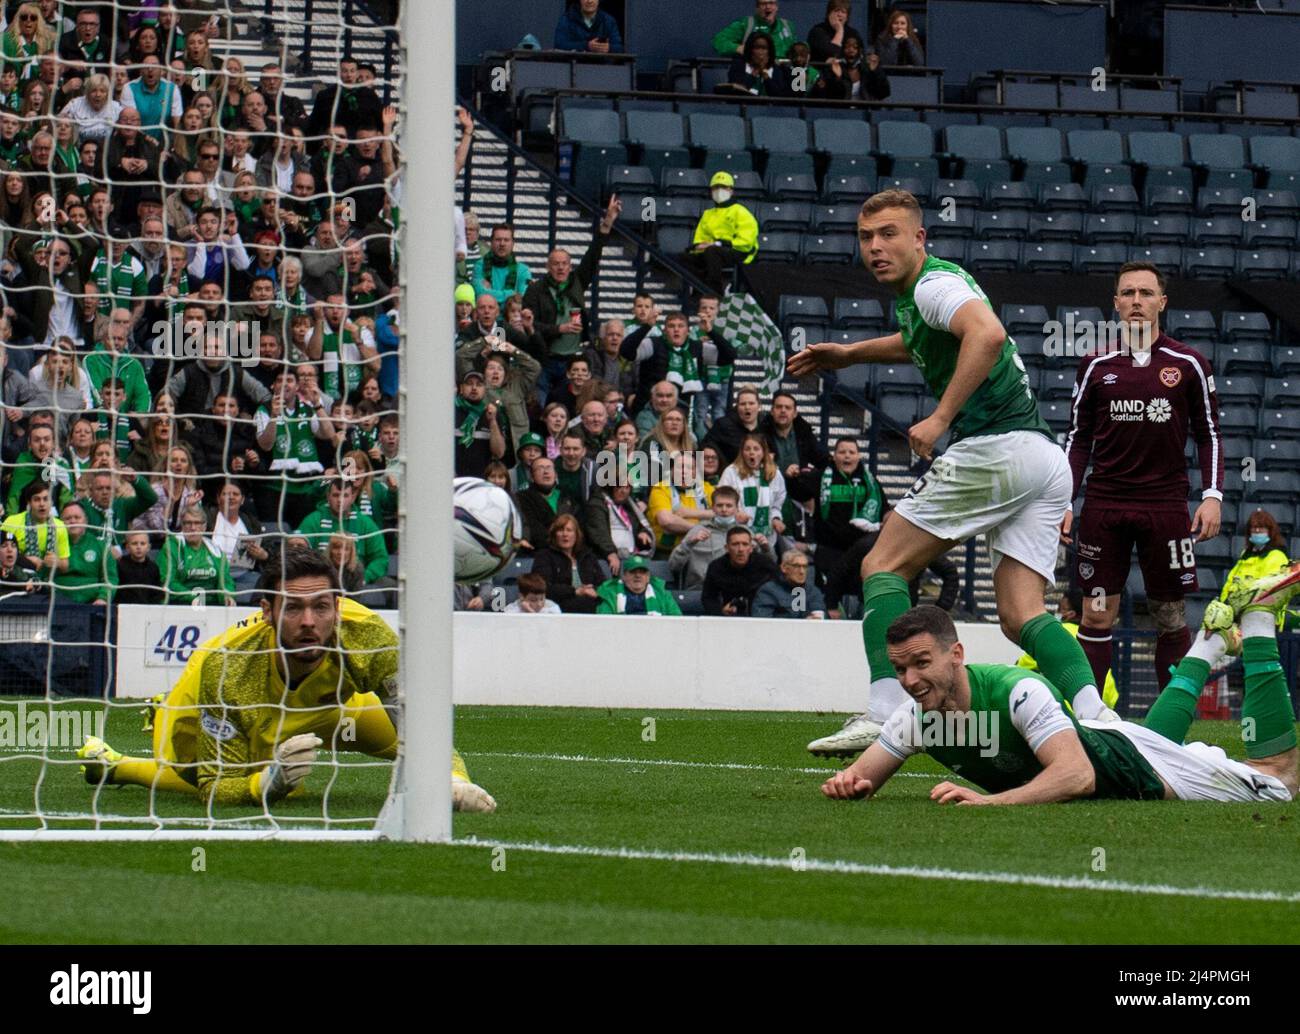 Glasgow, UK. 07th Apr, 2022. Scottish Cup semi final - Heart of Midlothian FC v Hibernian FC 07/04/2022 Pic shows: A world class save by Hearts' goalkeeper, Craig Gordon, prevents HibsÕ centre-back, Ryan PorteousÕ header going into the net as Hearts take on Hibs in the Scottish Cup semi final at Hampden Park, Glasgow Credit: Ian Jacobs/Alamy Live News Stock Photo